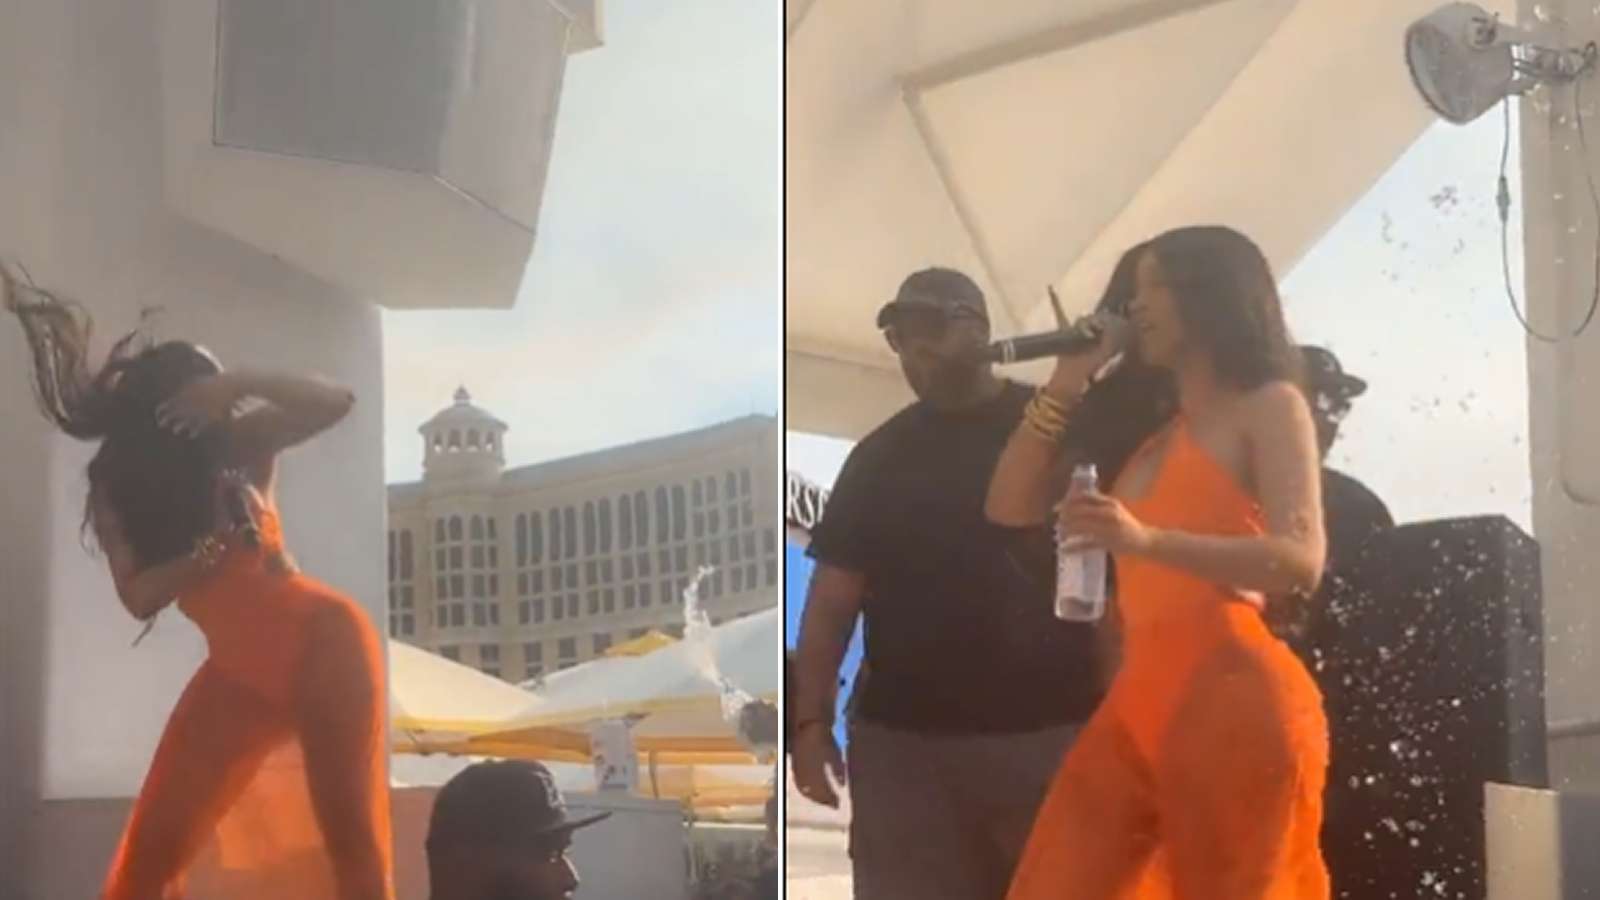 New footage reveals Cardi B encouraged crowd to splash her ahead of viral mic throw